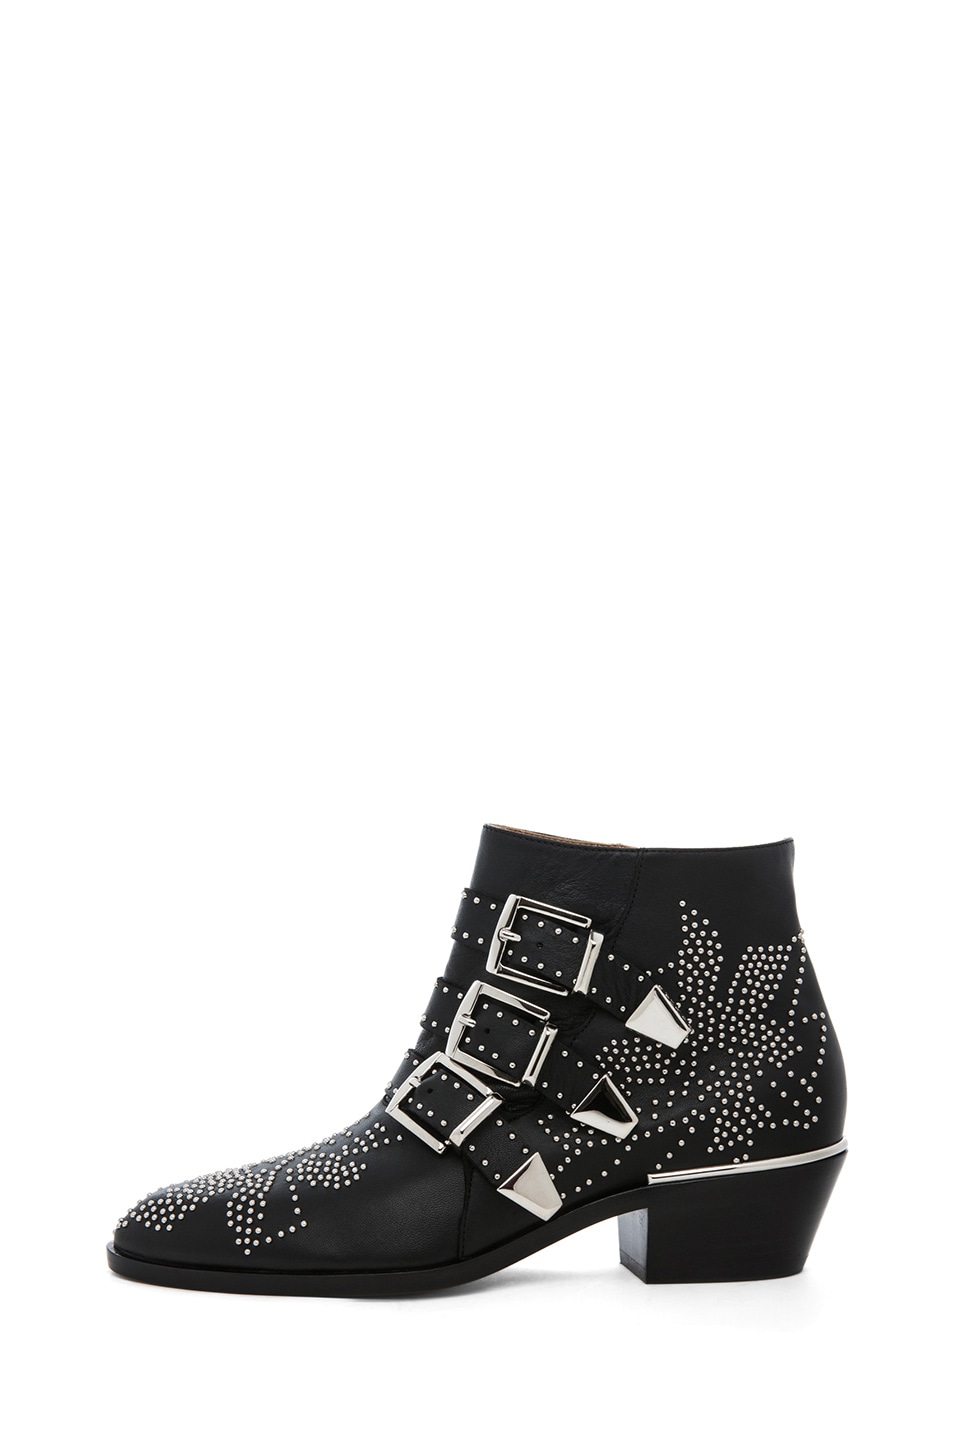 Image 1 of Chloe Susanna Leather Studded Booties in Black